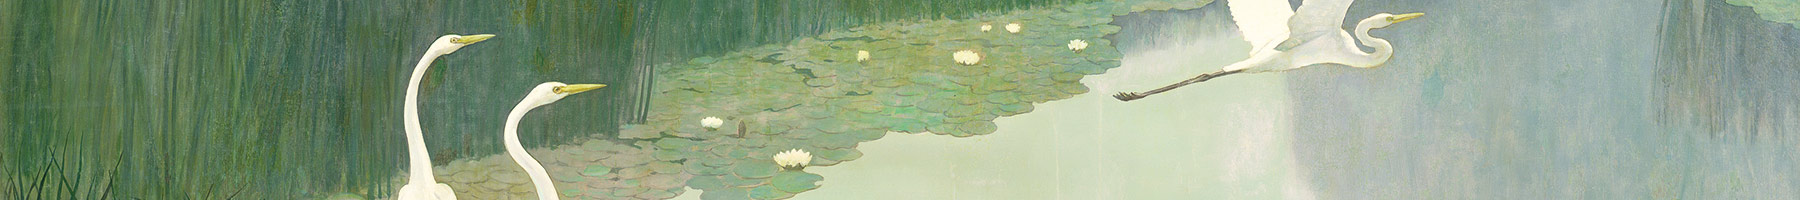 a painting of herons at the edge of a lily pad covered water